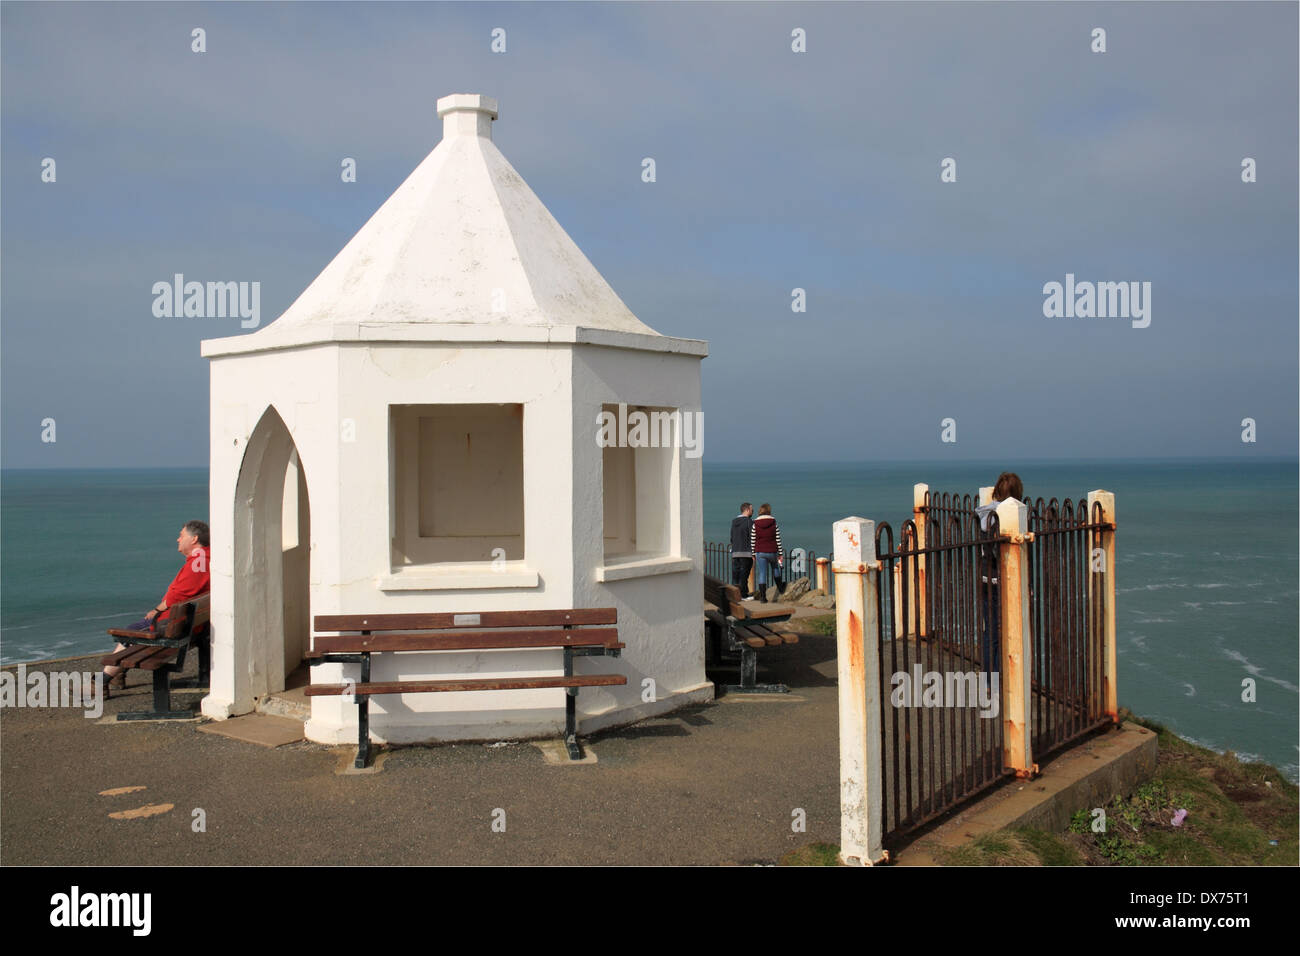 Shelter and viewpoint, Little Fistral Headland, Newquay, Cornwall, England, Great Britain, United Kingdom, UK, Europe Stock Photo